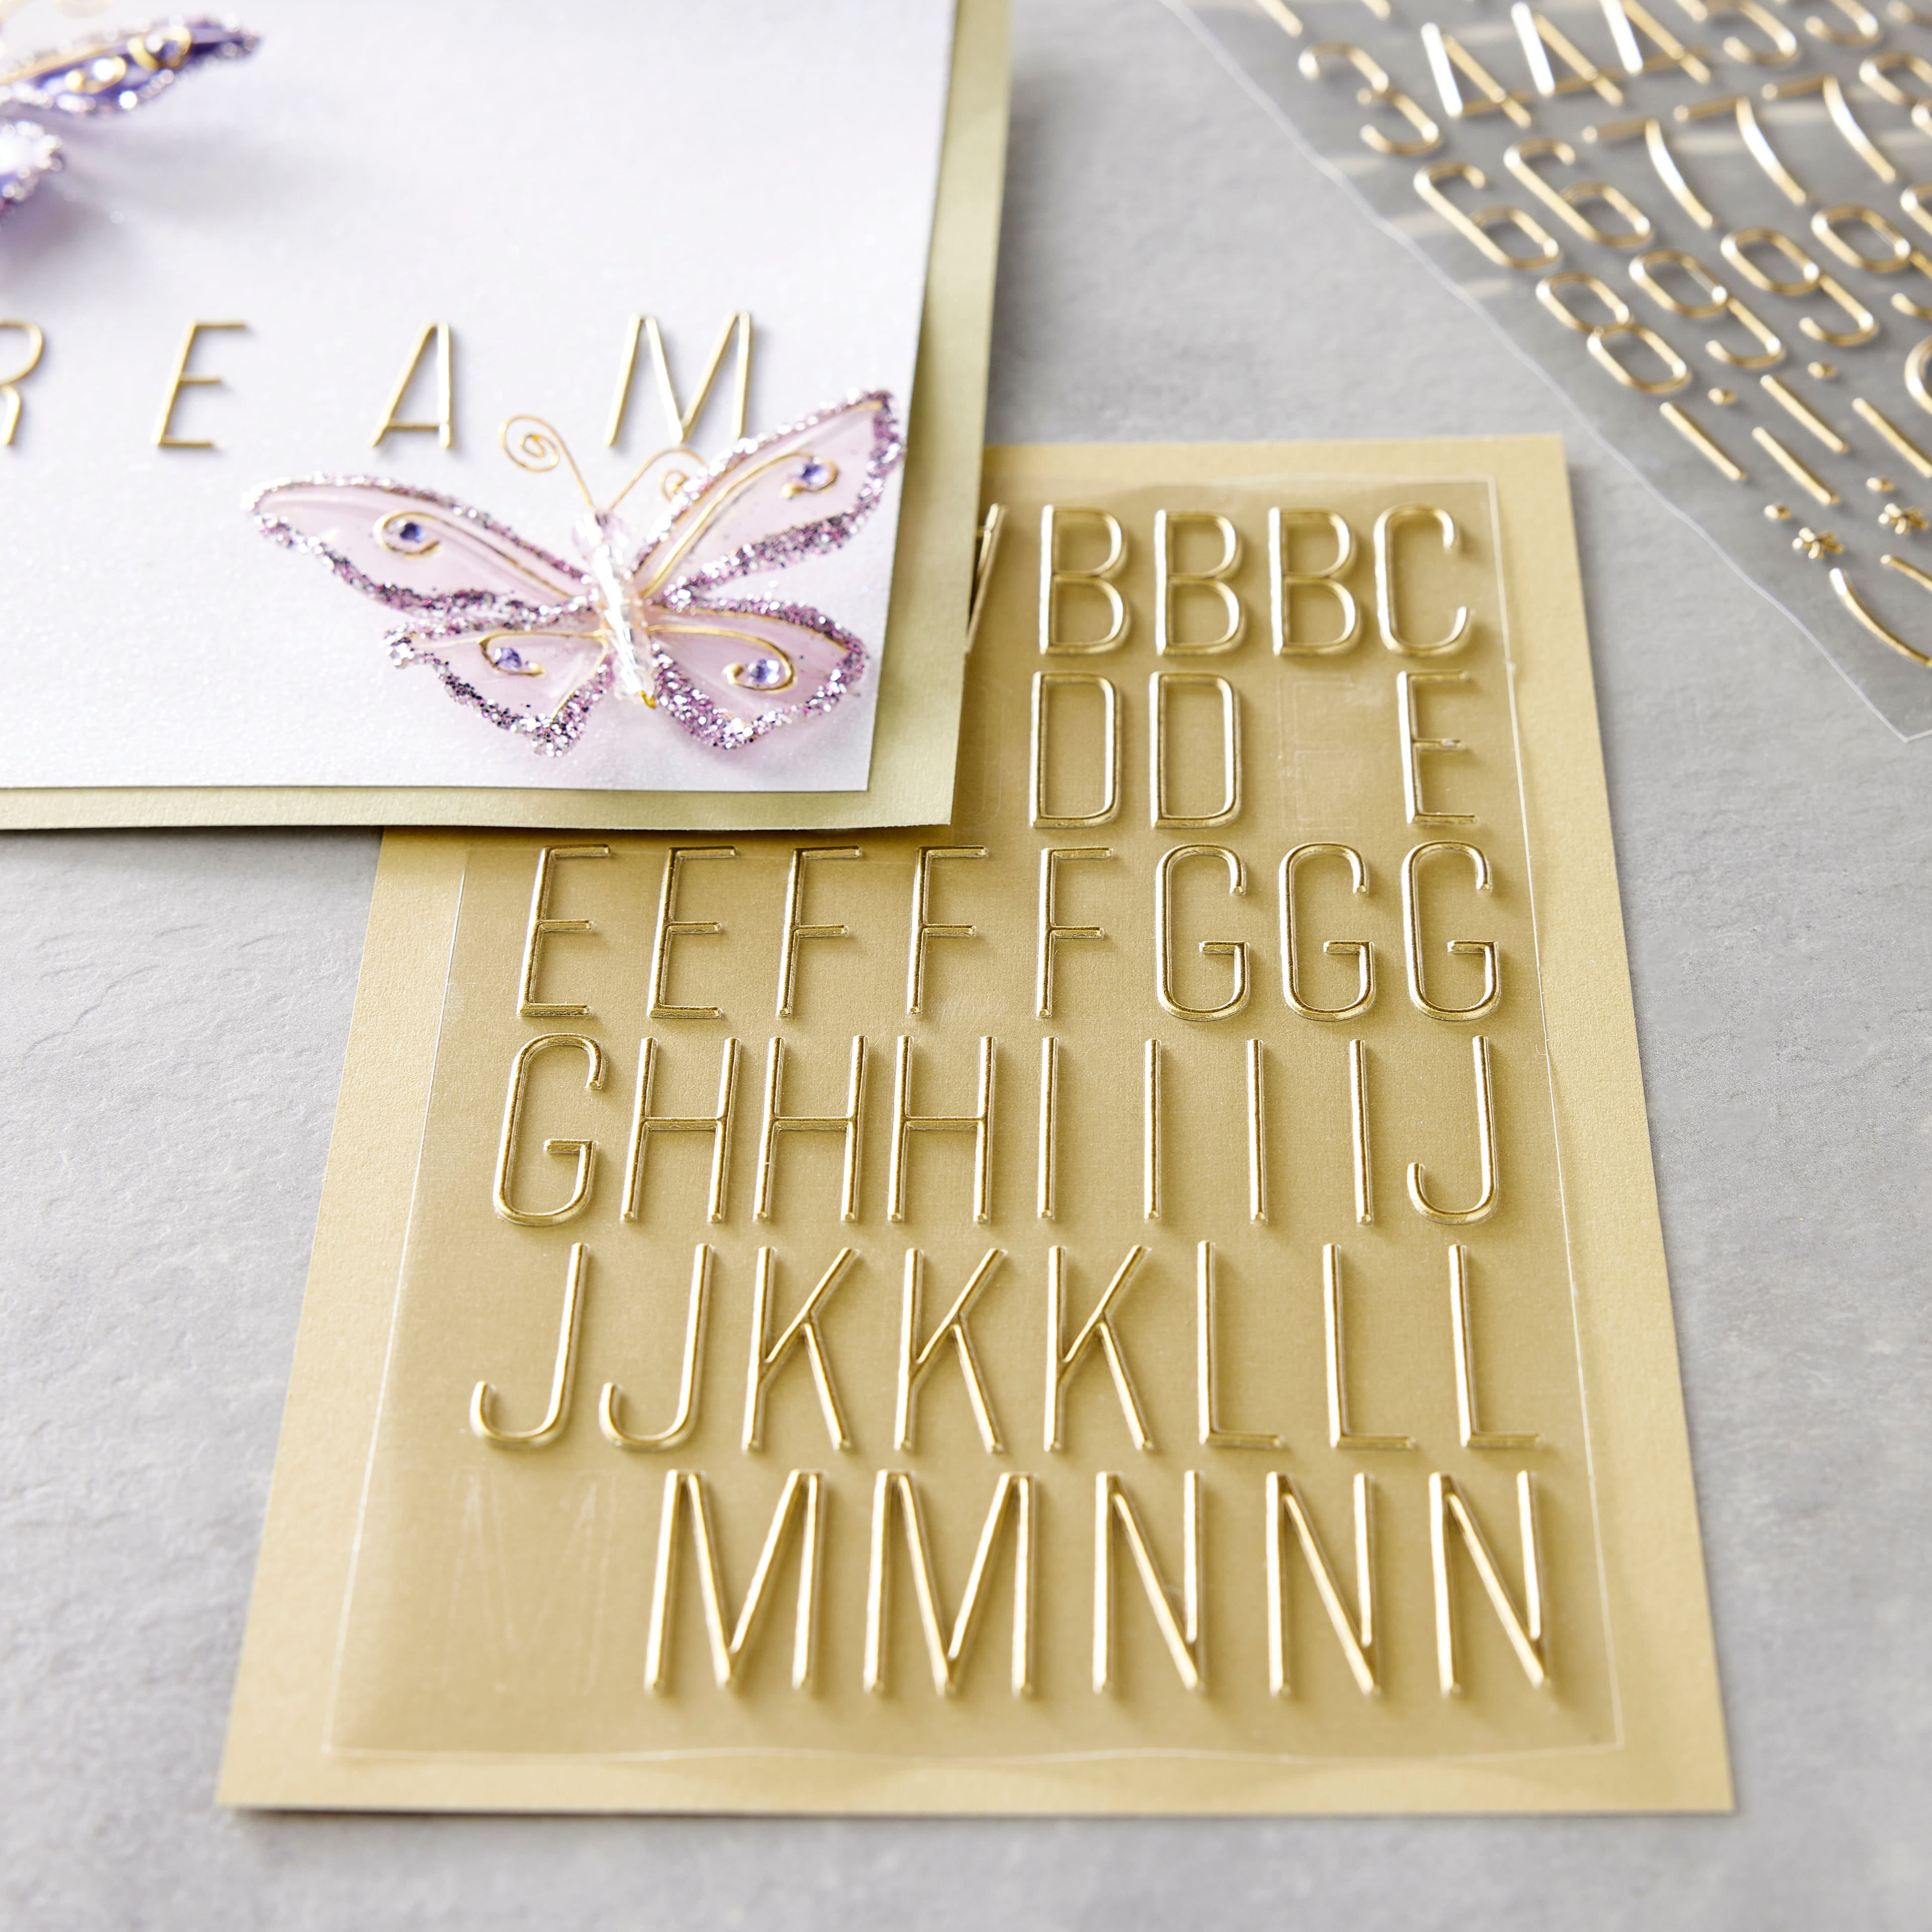 12 Packs: 85 ct. (1,020 total) Bernhard Gold Glitter Alphabet Foam Stickers  by Recollections™